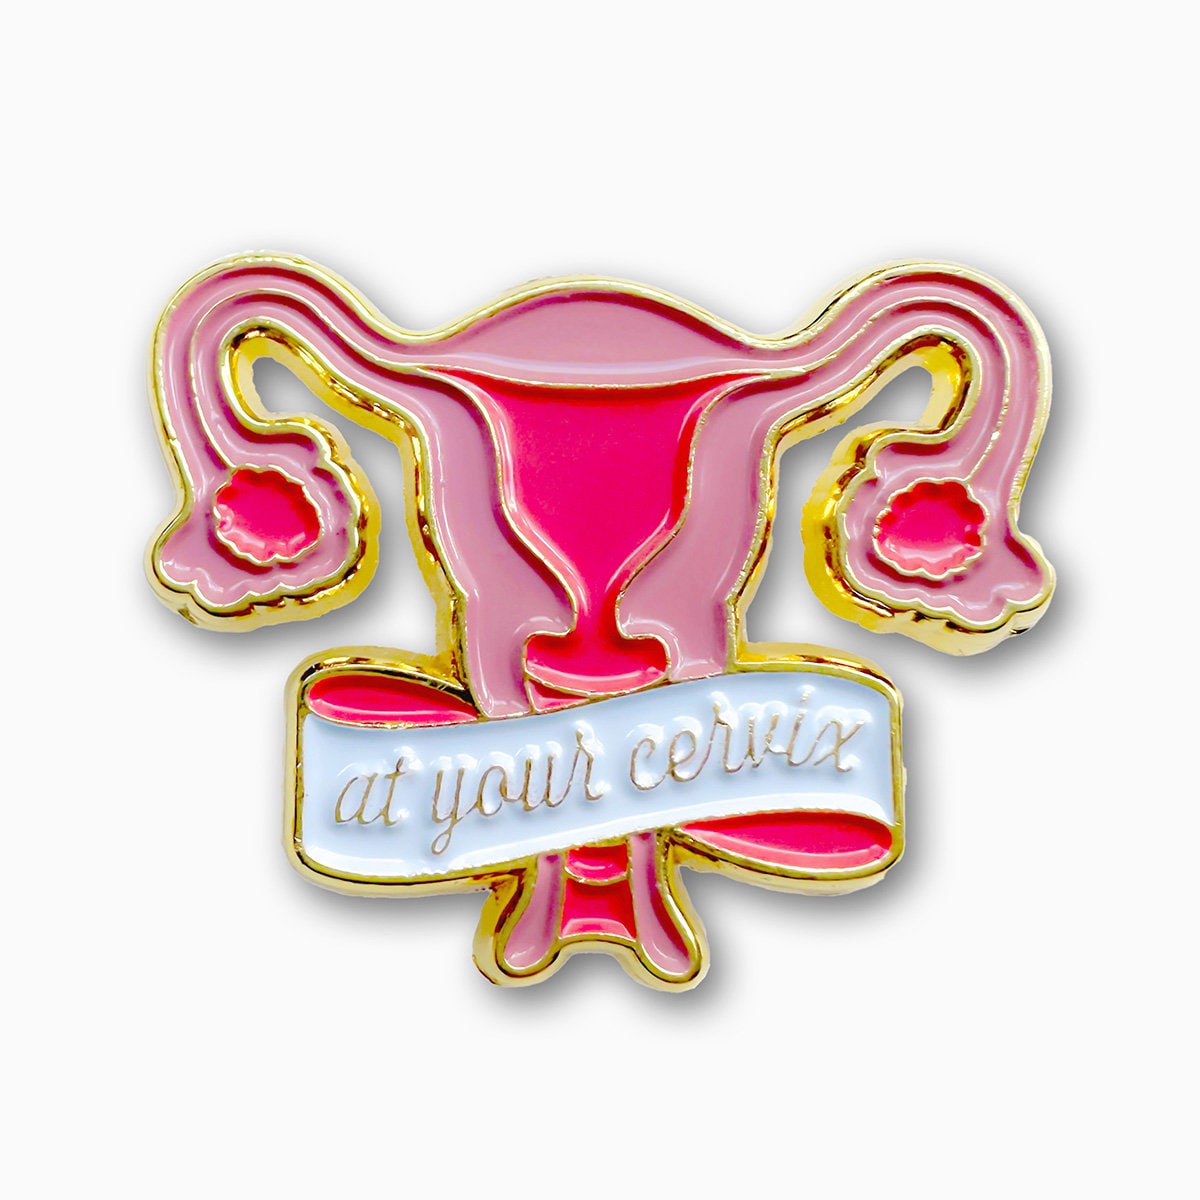 At Your Cervix Badge 